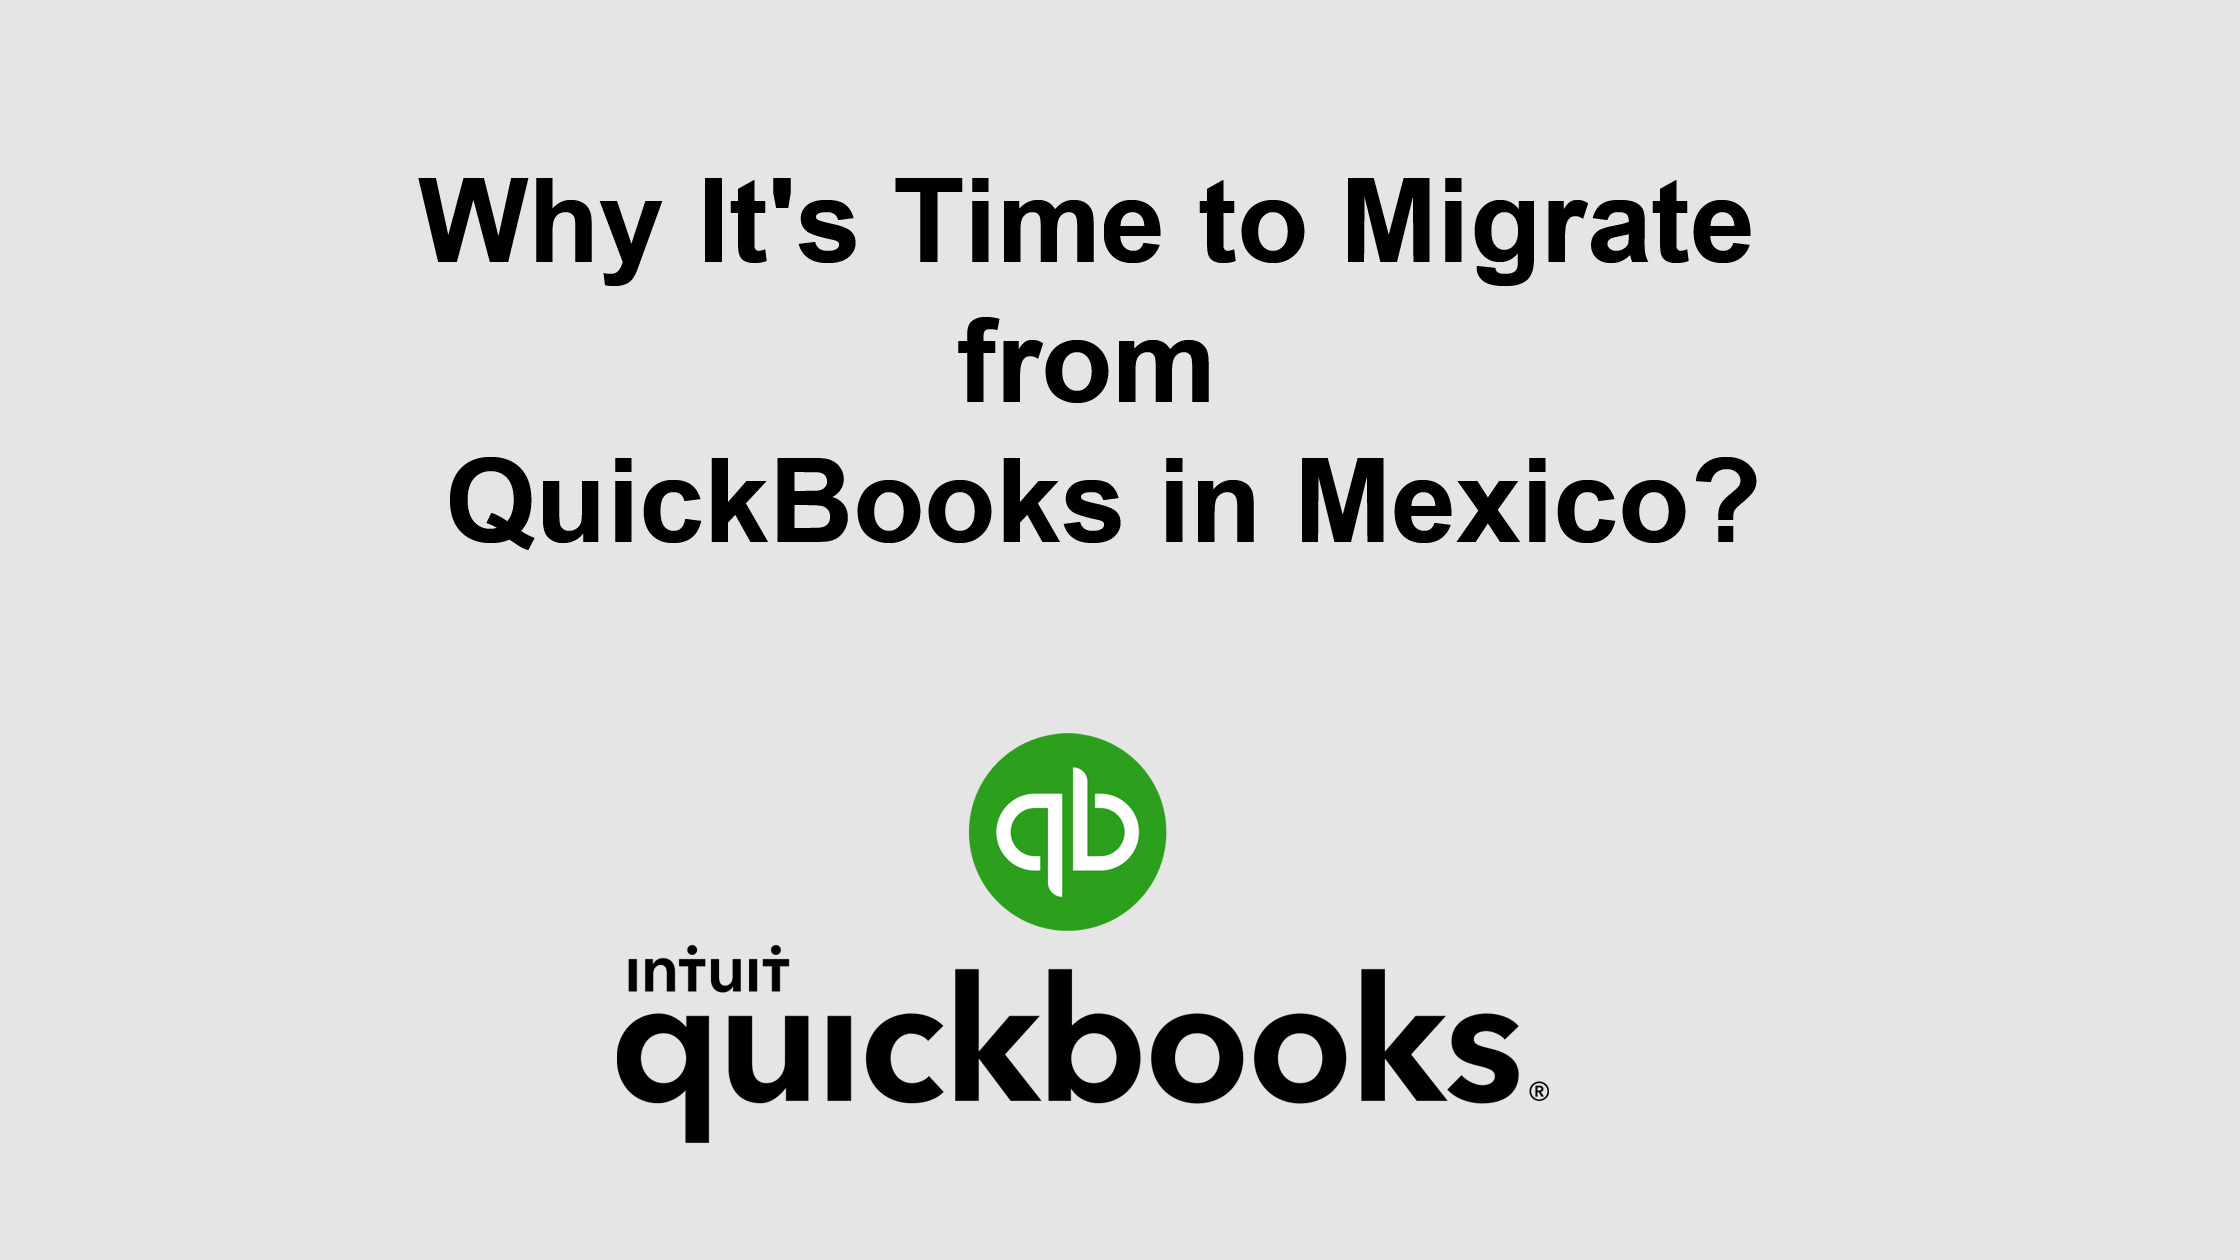 Why It’s Time to Migrate from QuickBooks in Mexico?